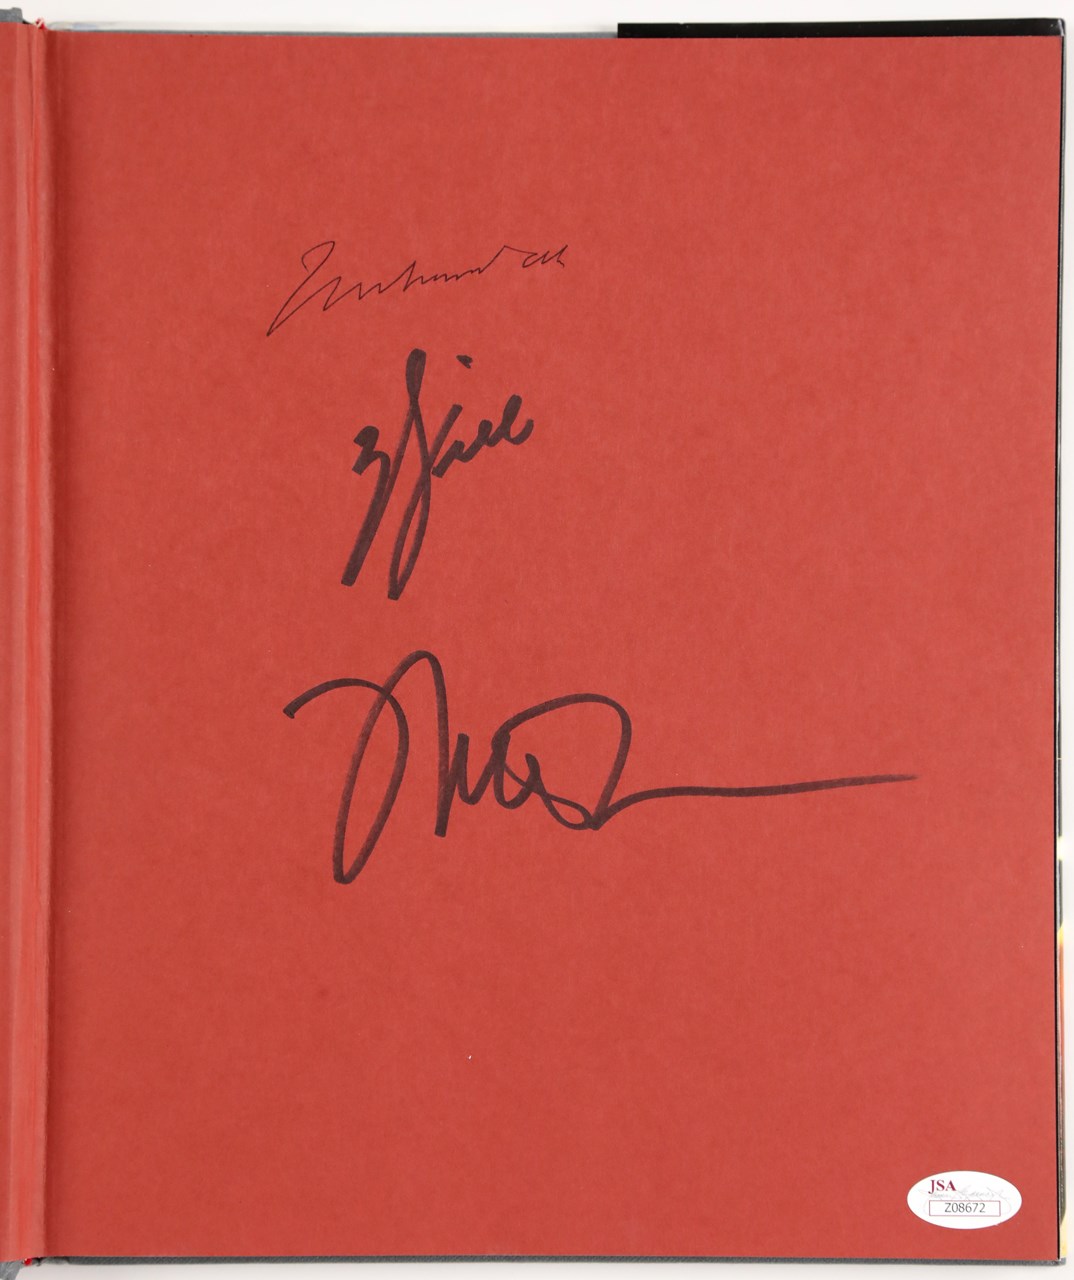 - Special "Ali" Book Signed by Muhammad Ali, Will Smith, & Director Michael Mann - Gifted to Hollywood Press Member for Golden Globe Nomination (JSA)